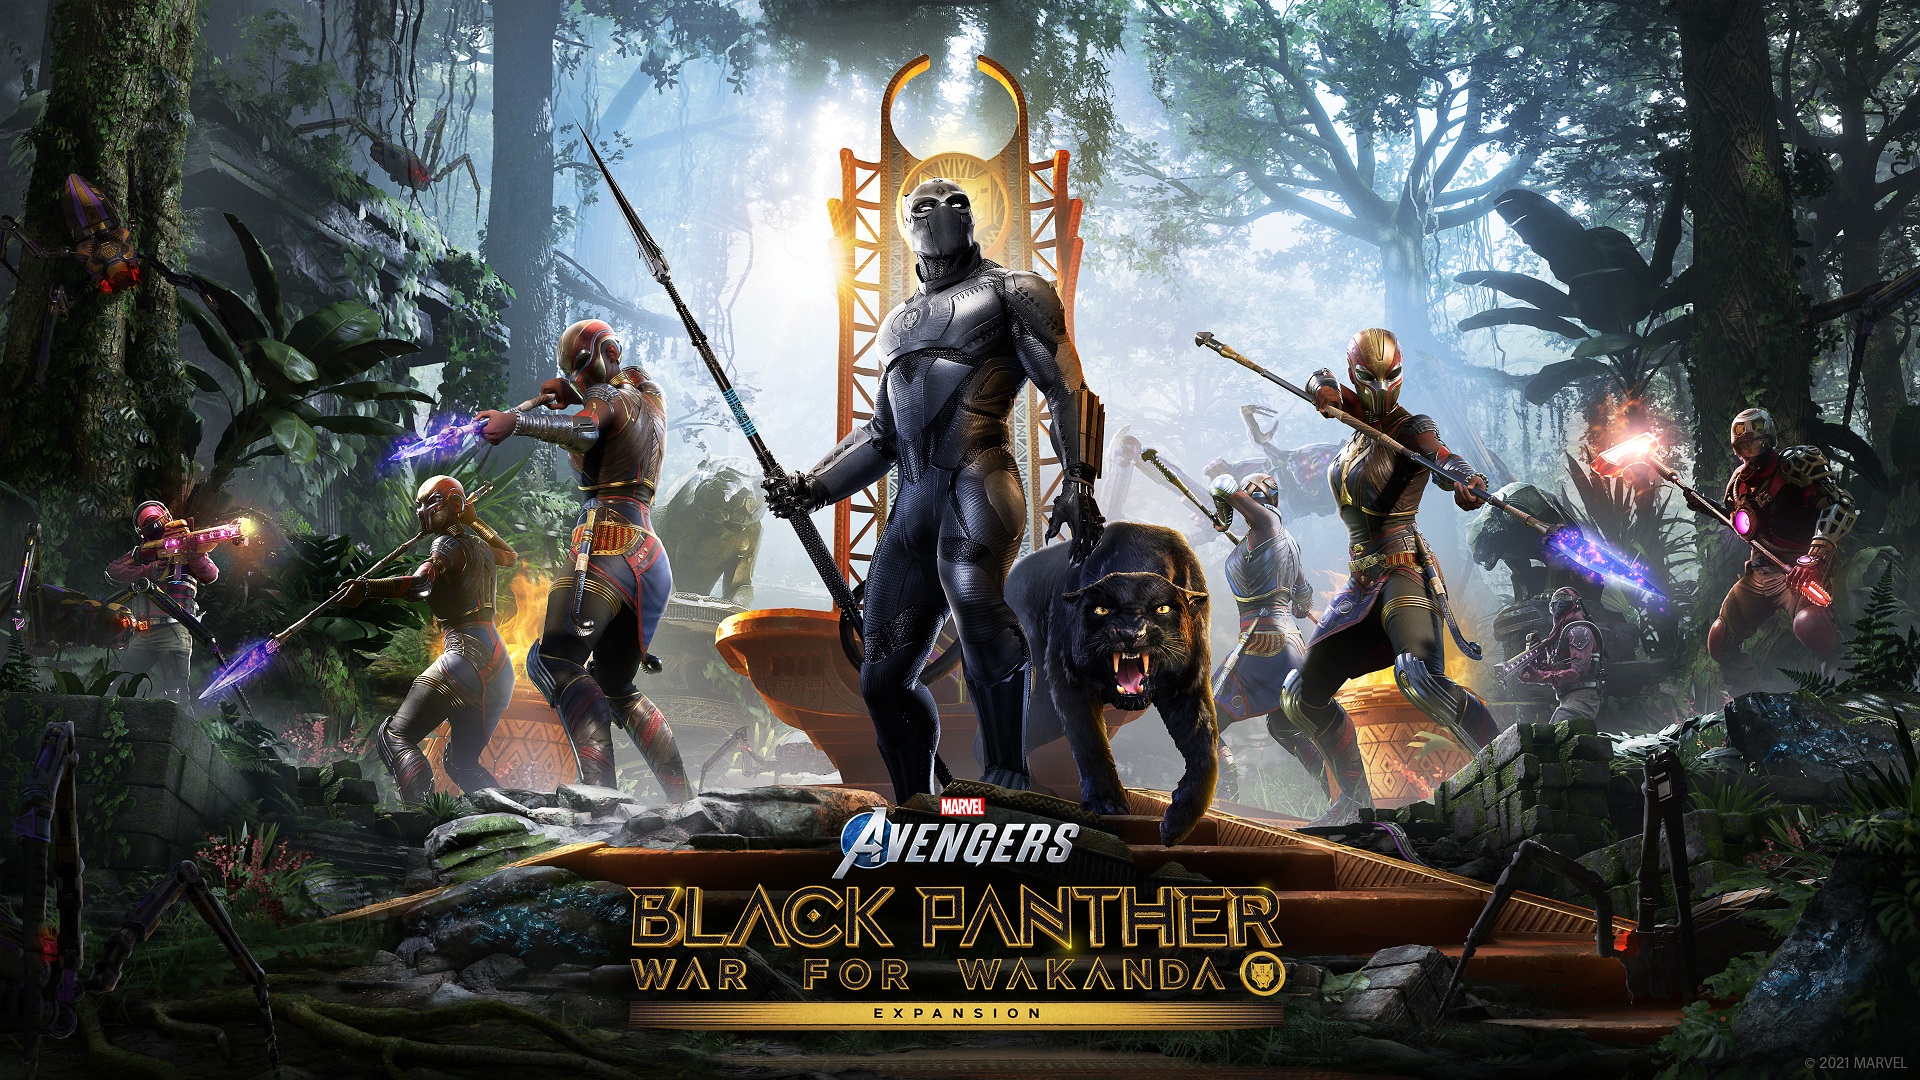 Black Panther joins Marvel’s Avengers with War for Wakanda